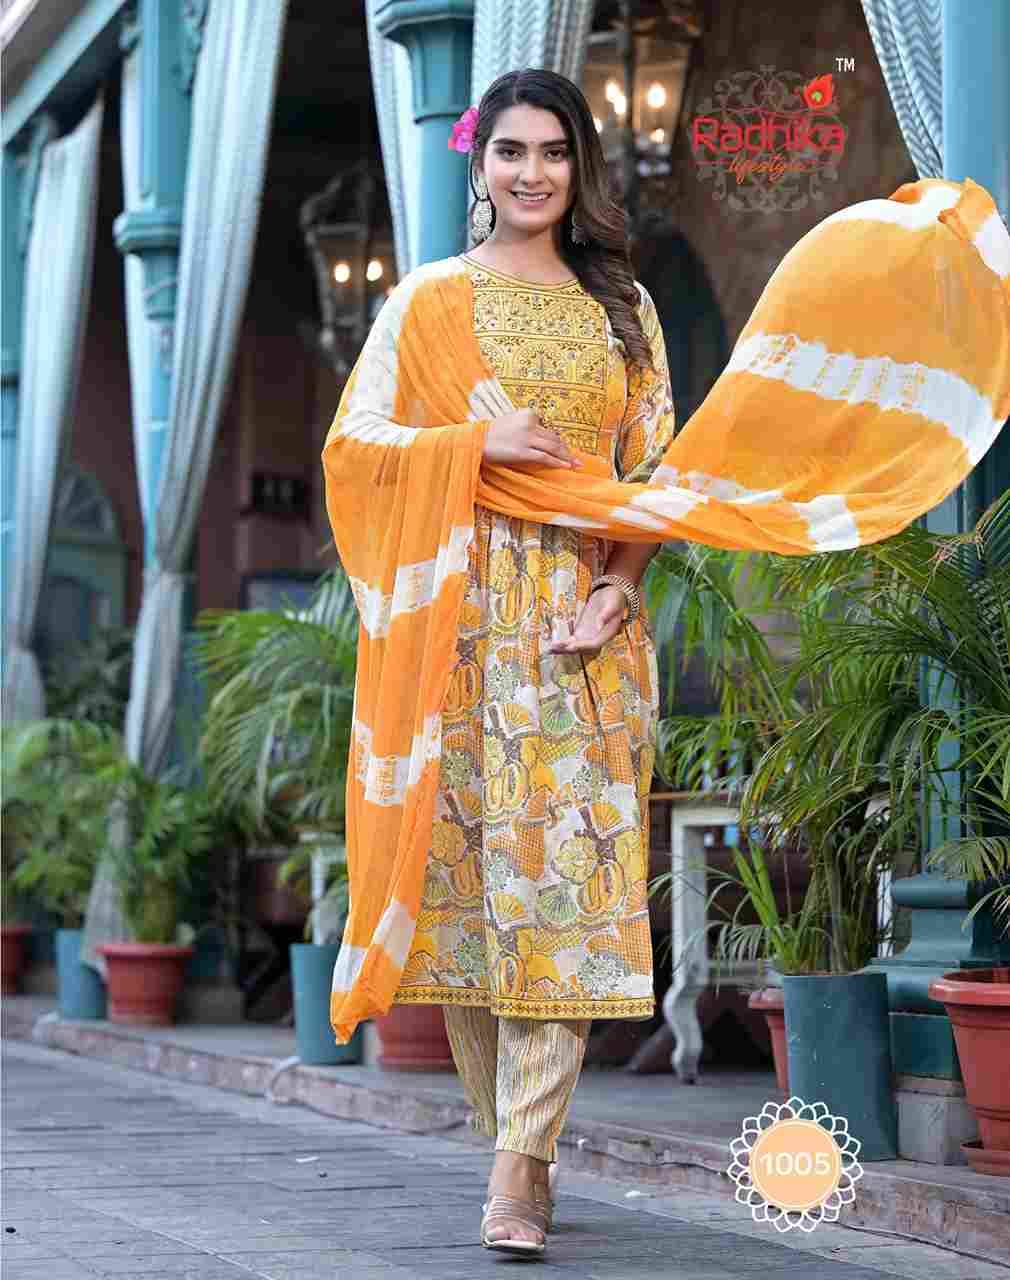 Resham Vol-1 By Radhika Lifestyle 1001 To 1008 Series Beautiful Stylish Festive Suits Fancy Colorful Casual Wear & Ethnic Wear & Ready To Wear Rayon Foil Dresses At Wholesale Price